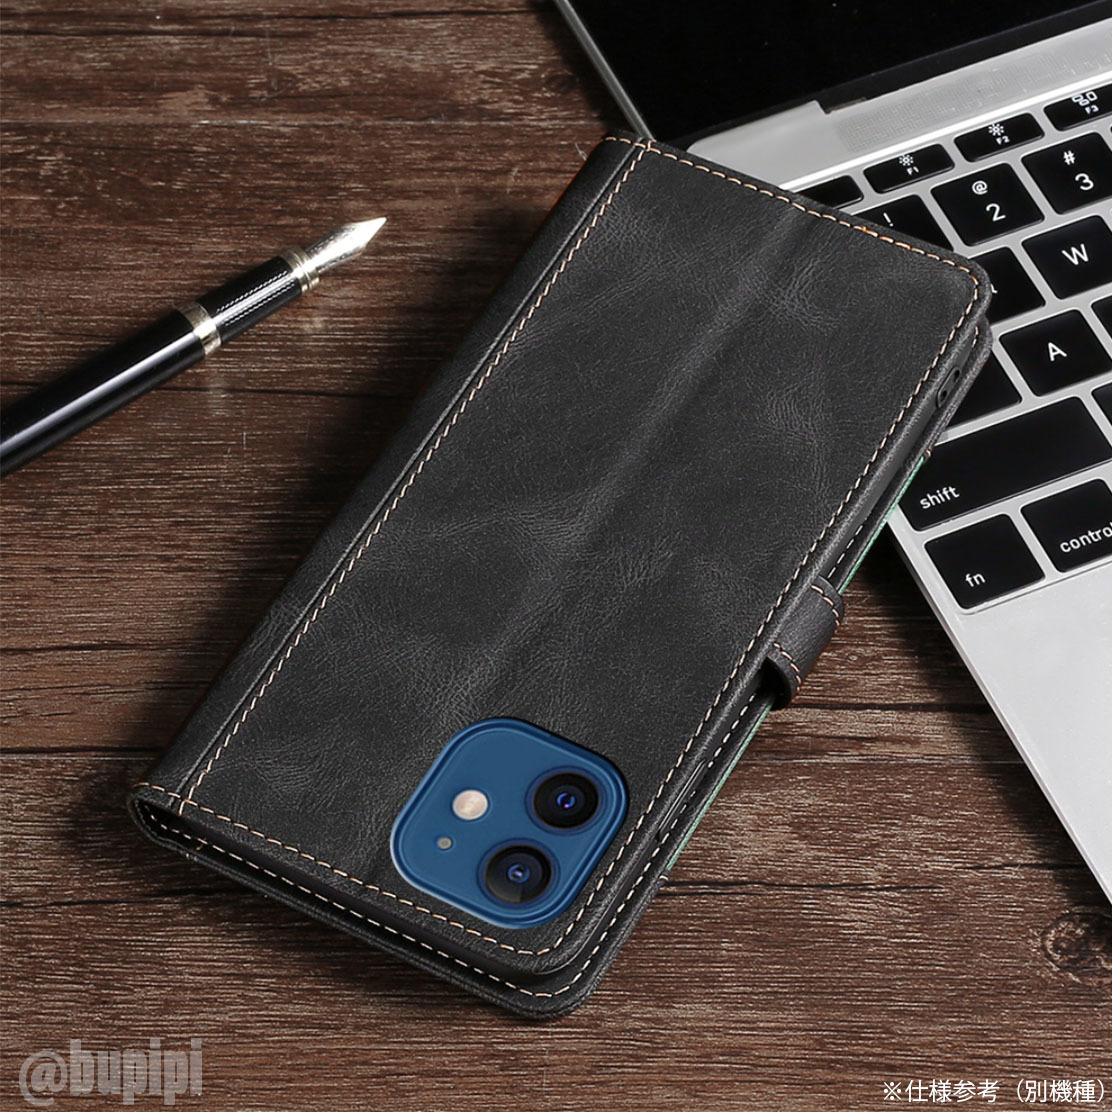  notebook type smartphone case high quality leather iphone X XS correspondence leather style black cover 